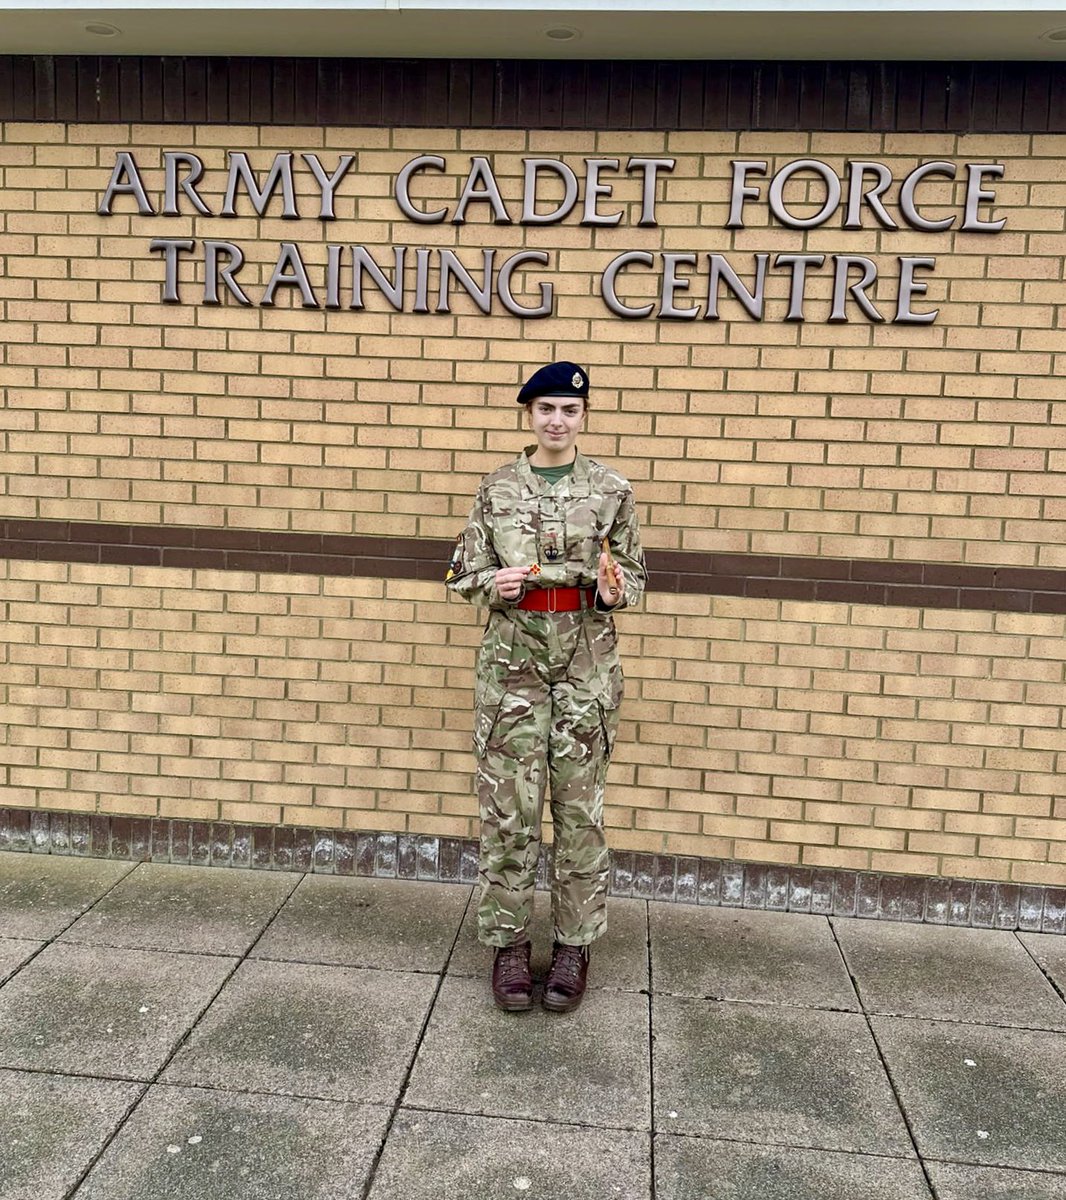 Well done to Cadet CSM Milevsky who has achieved the highest star level an Army Cadet can obtain, Master Cadet, a course which tests cadets knowledge and encourages them to demonstrate sound leadership skills 🌟 @ArmyCadetsUK @RFCANI @DepComdtMD @DComdt_2NIACF @Andrew68793165